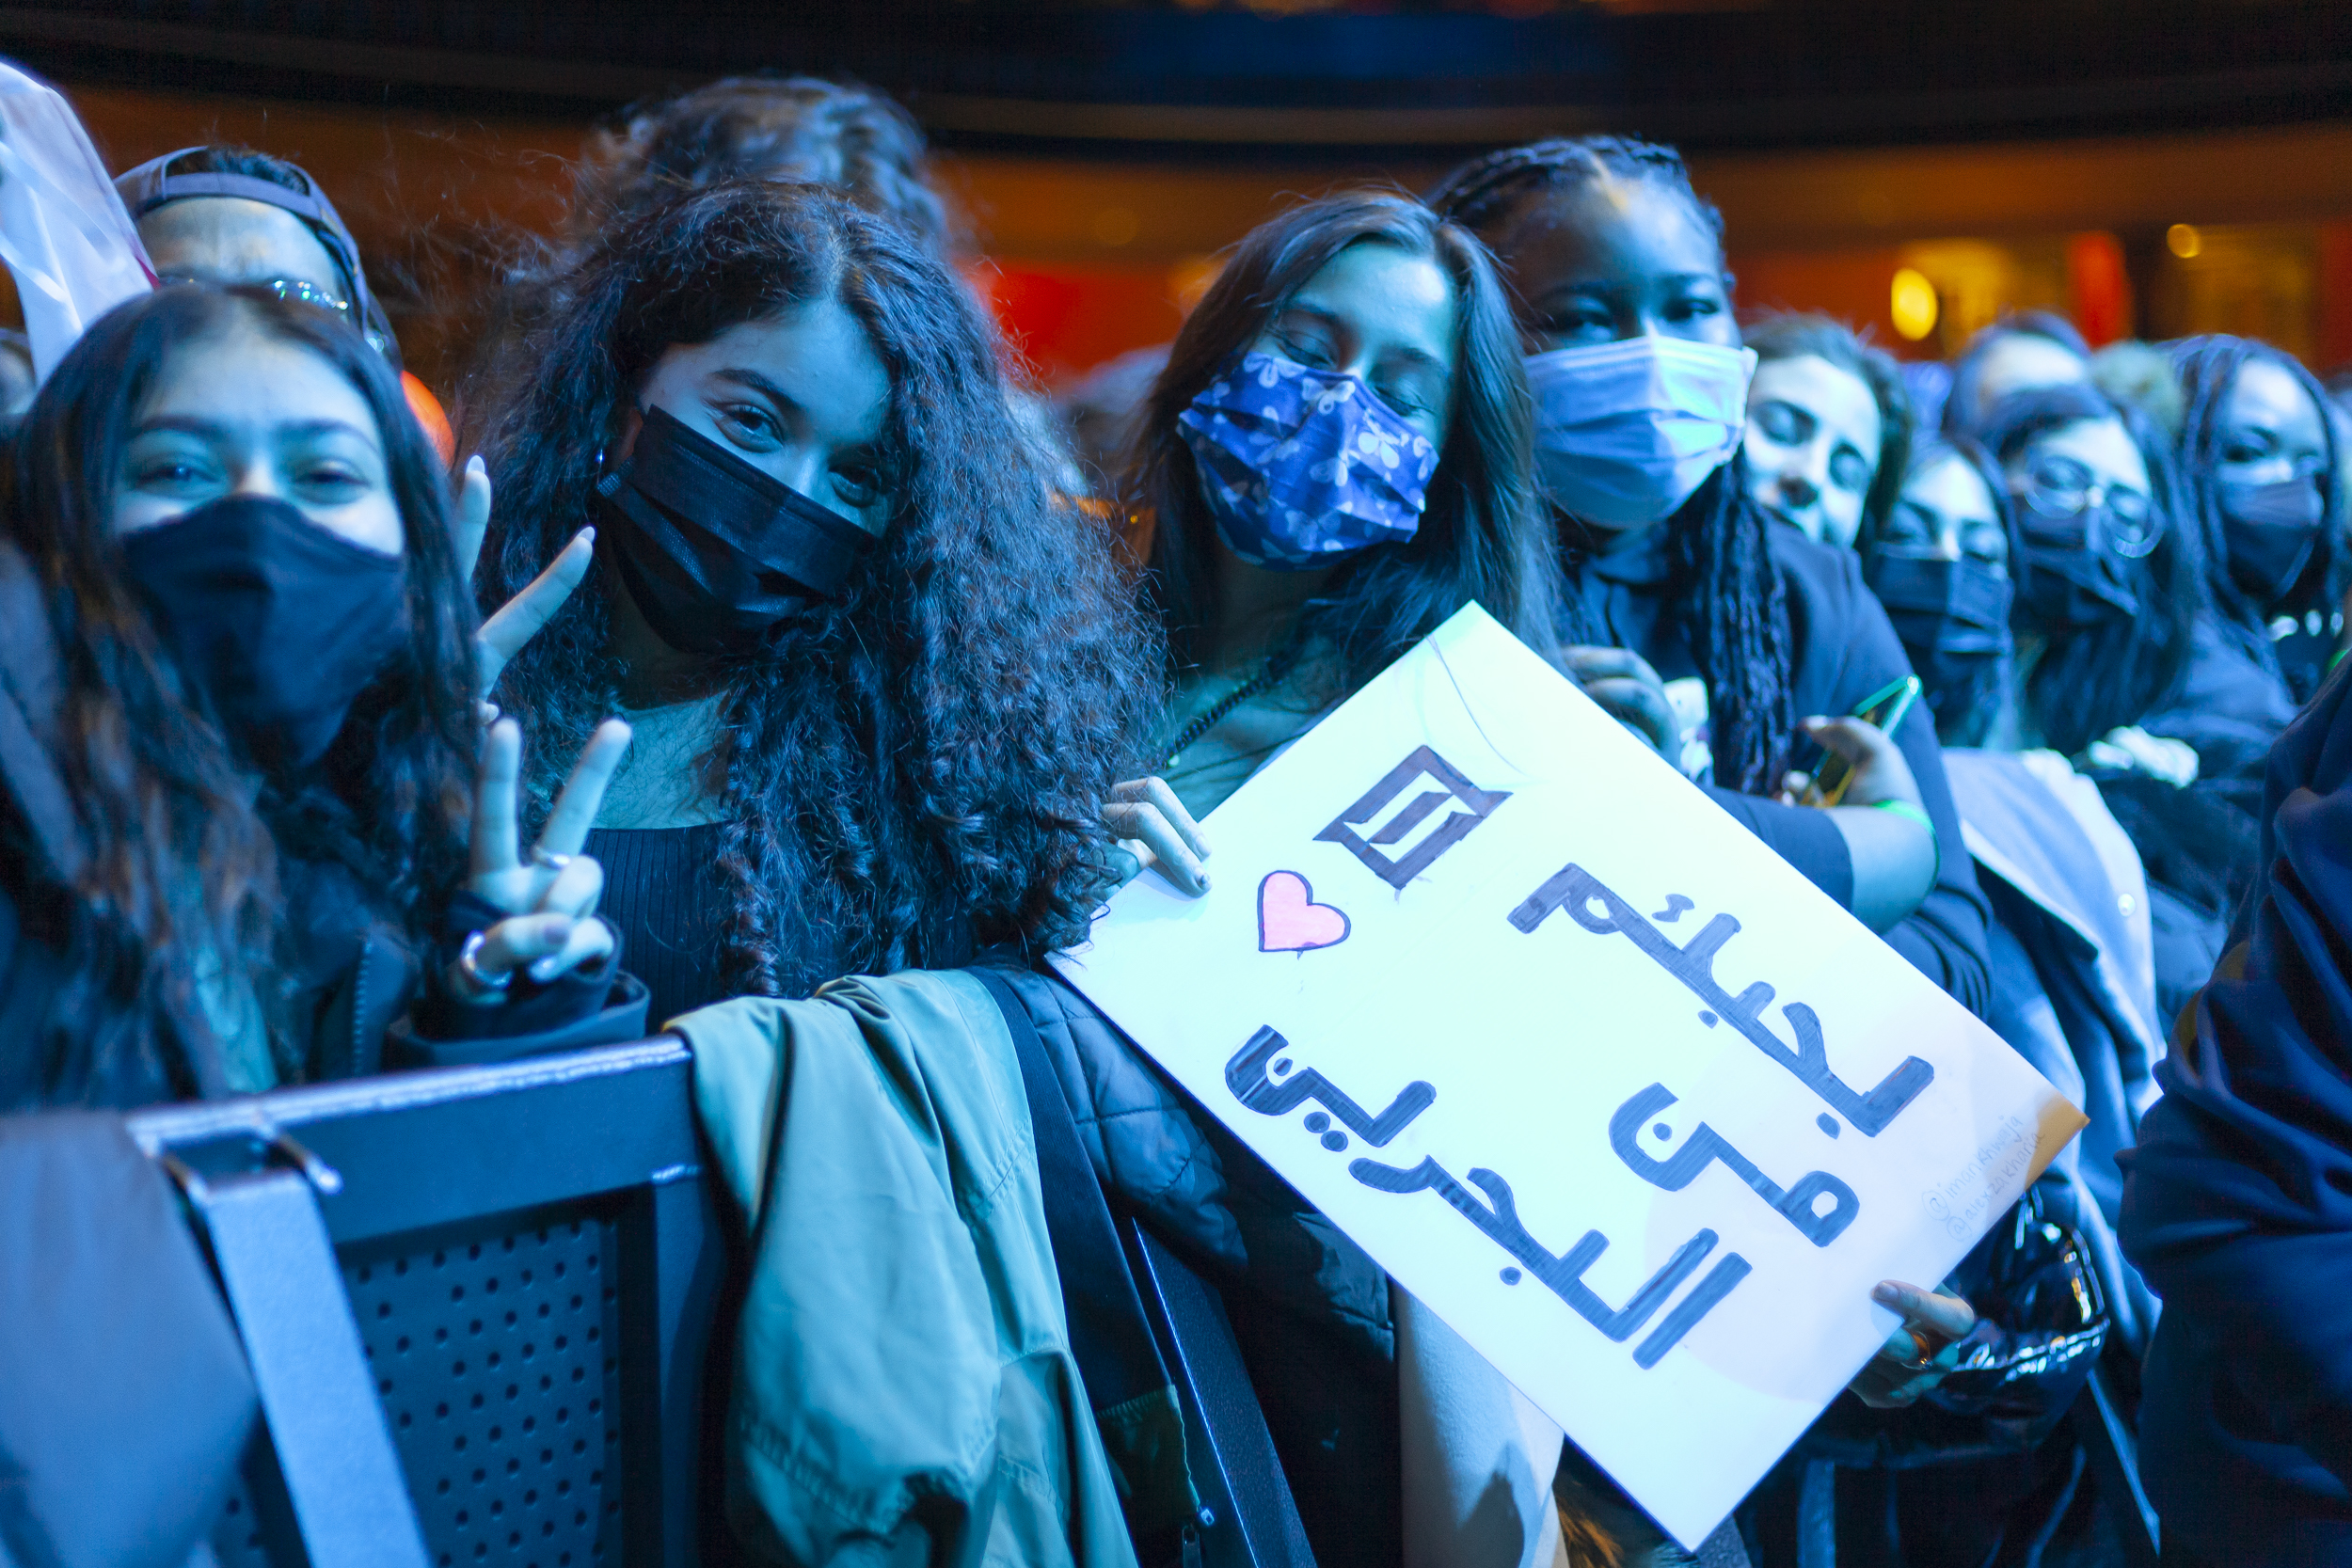 Fans at the Majid Jordan show holding a sign in the crowd